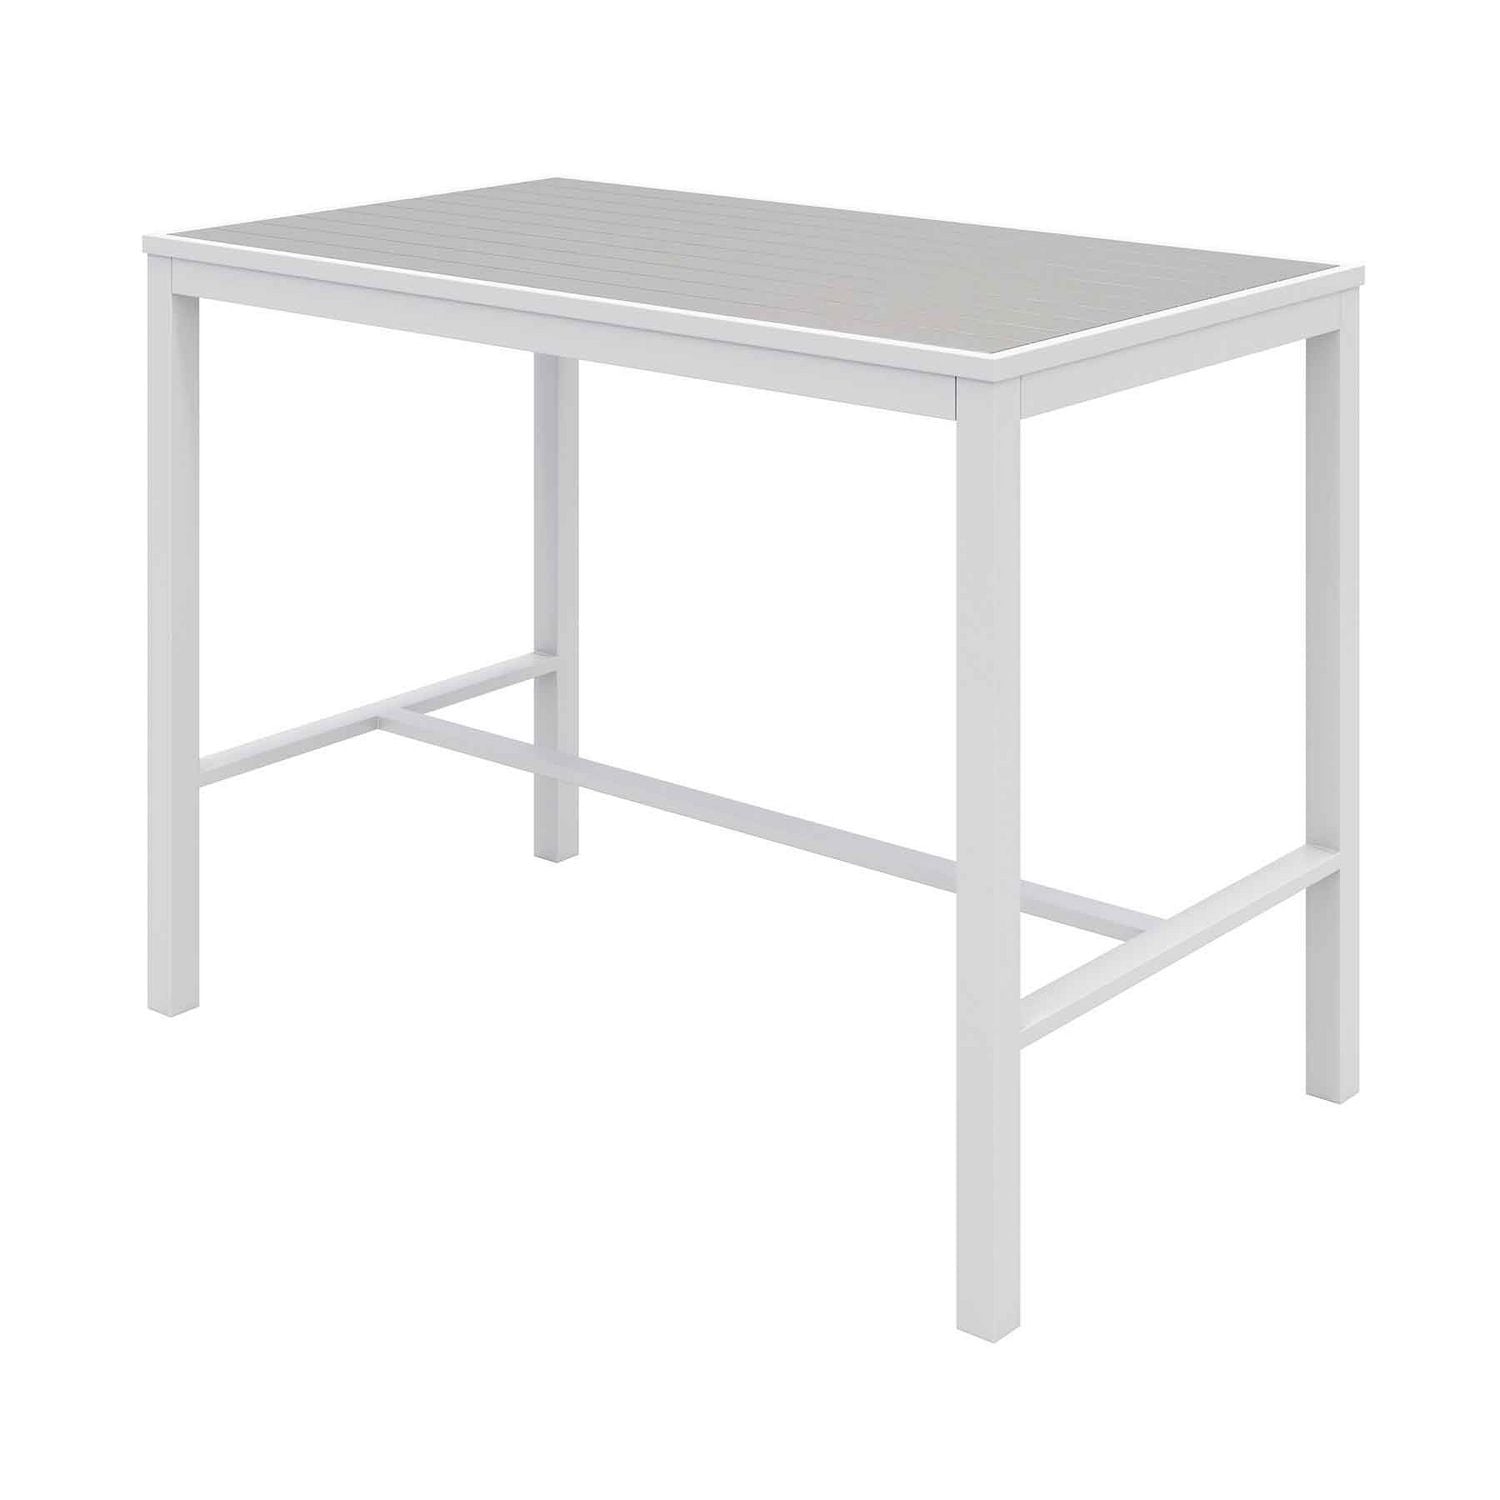 eveleen-outdoor-bistro-patio-table-with-four-gray-powder-coated-polymer-barstools-32-x-55-gray-ships-in-4-6-business-days_kfi840031925206 - 2